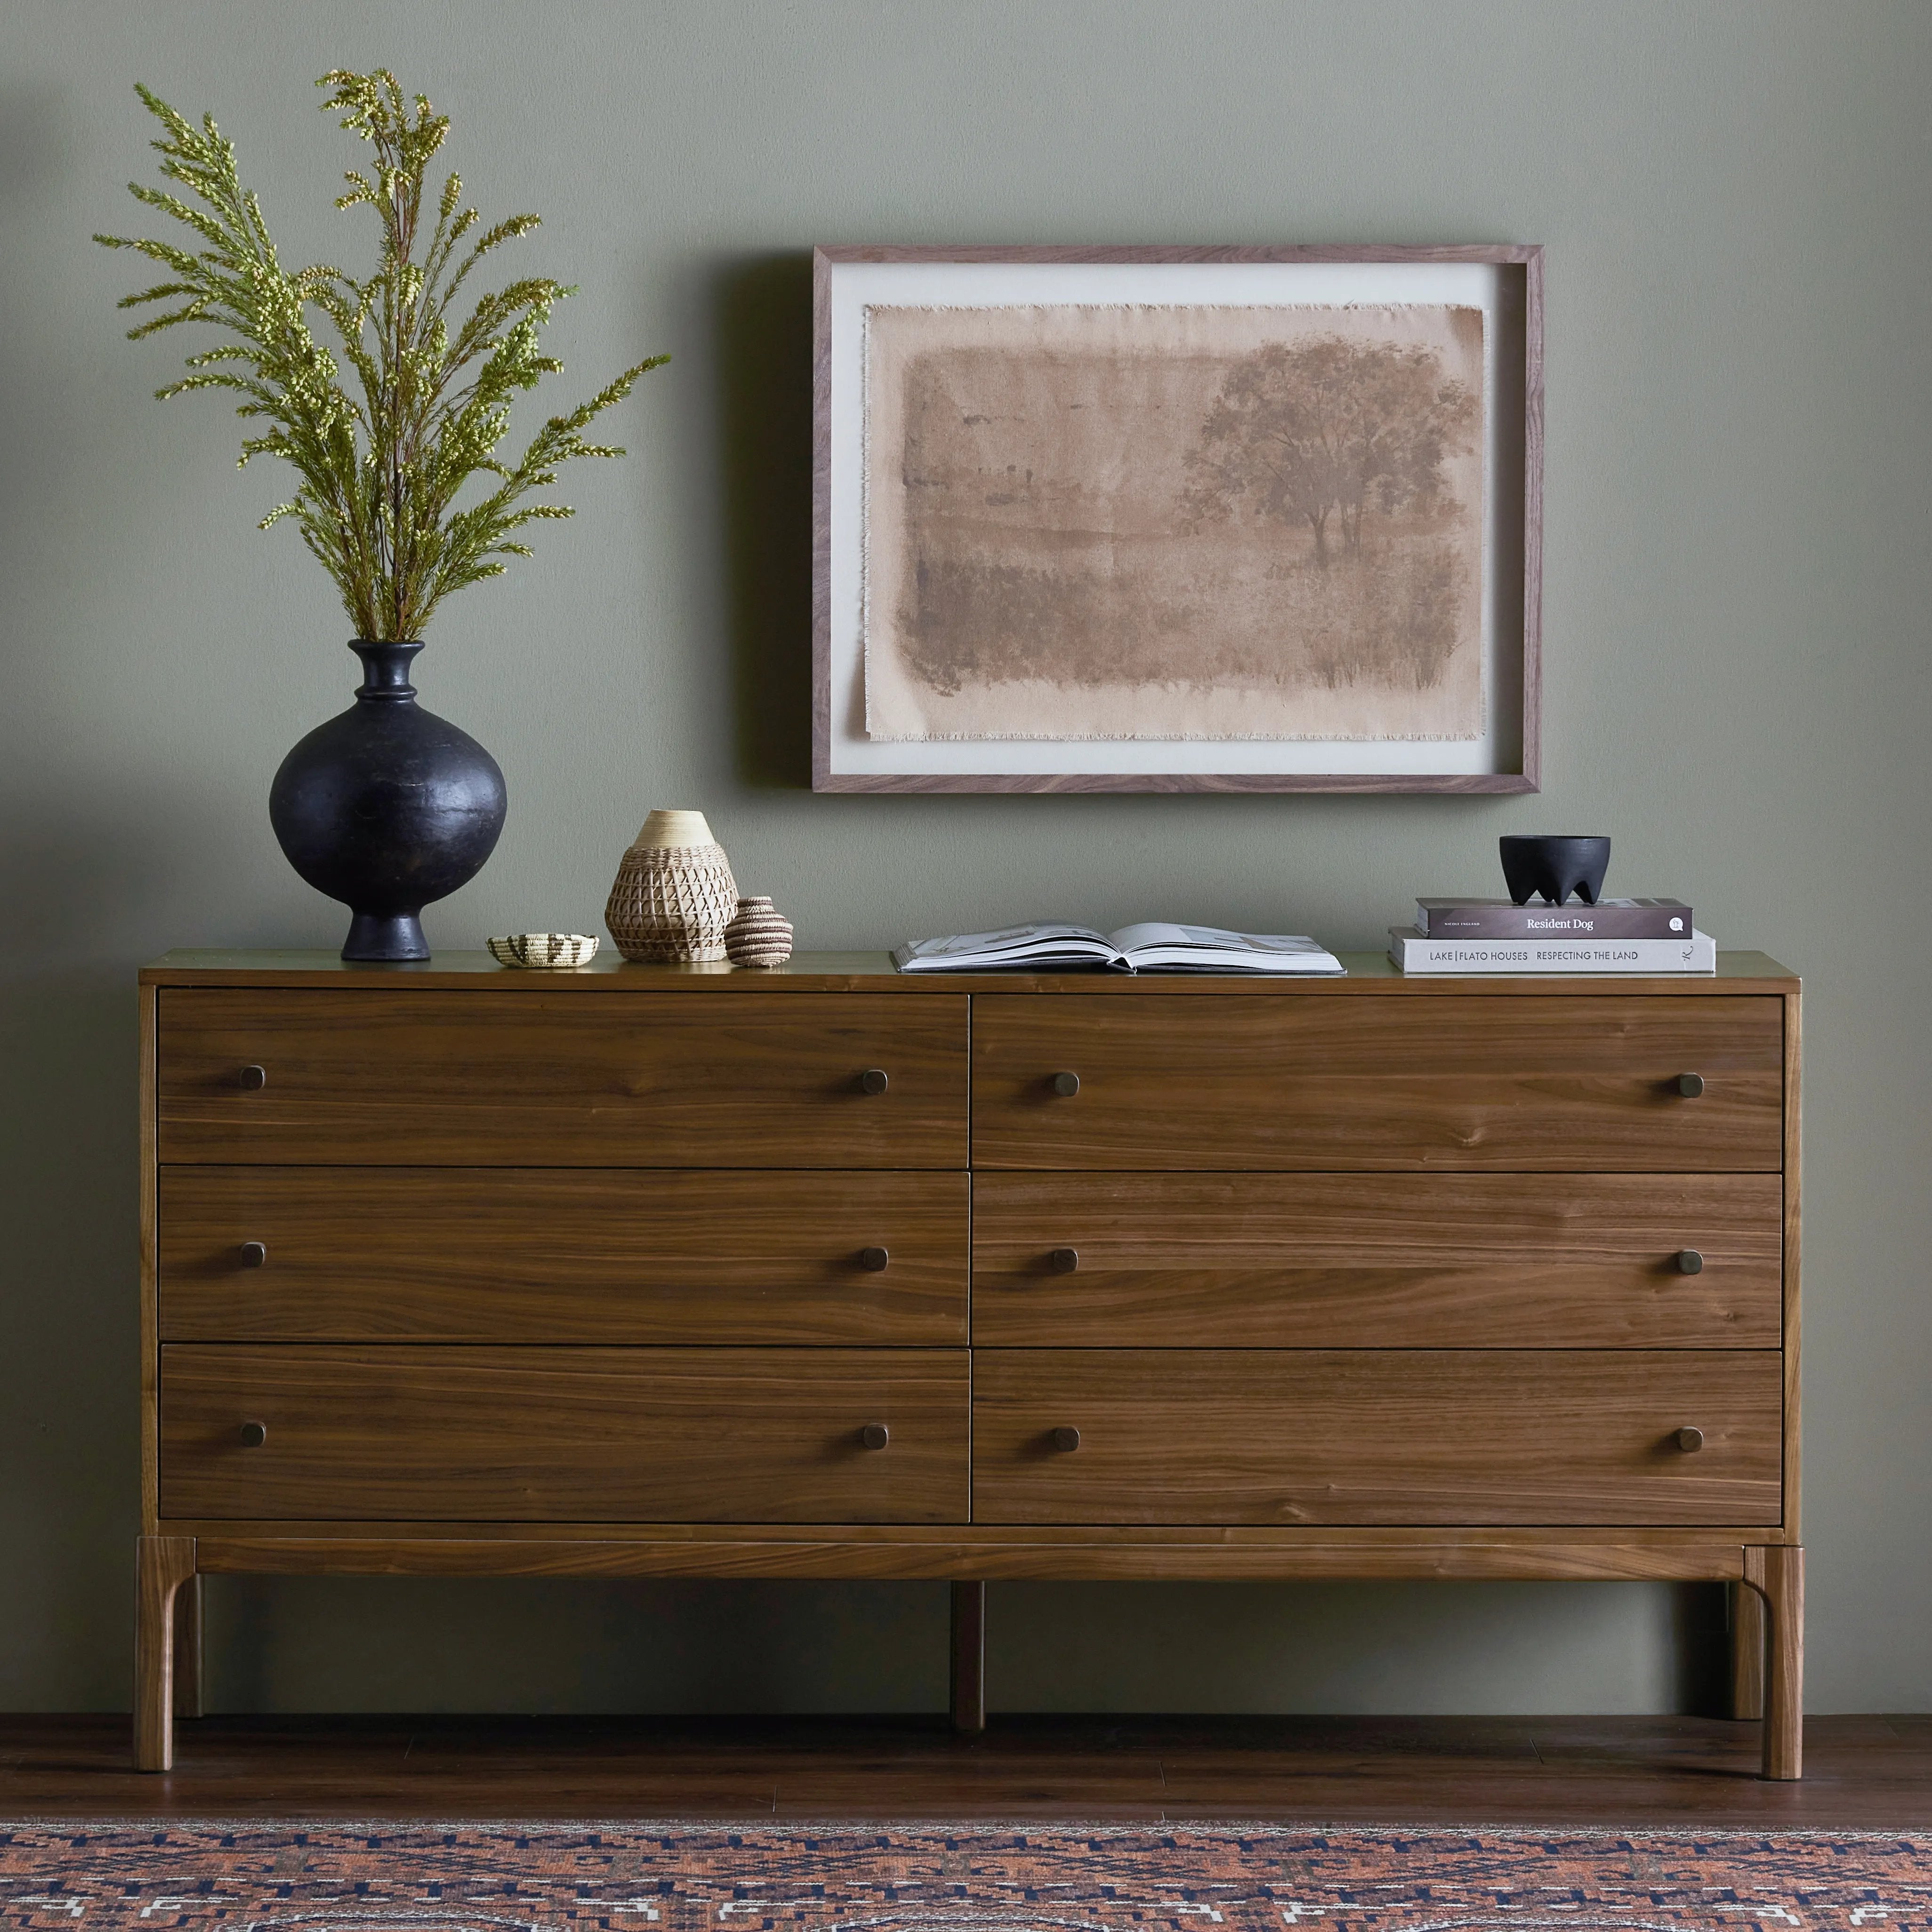 Inspired by campaign-style furniture of the 1800s â€” packable pieces first designed for traveling military use â€” a simply shaped dresser of natural walnut features a subtly inset top and rounded legs, finished with wooden hardware Amethyst Home provides interior design, new home construction design consulting, vintage area rugs, and lighting in the Salt Lake City metro area.